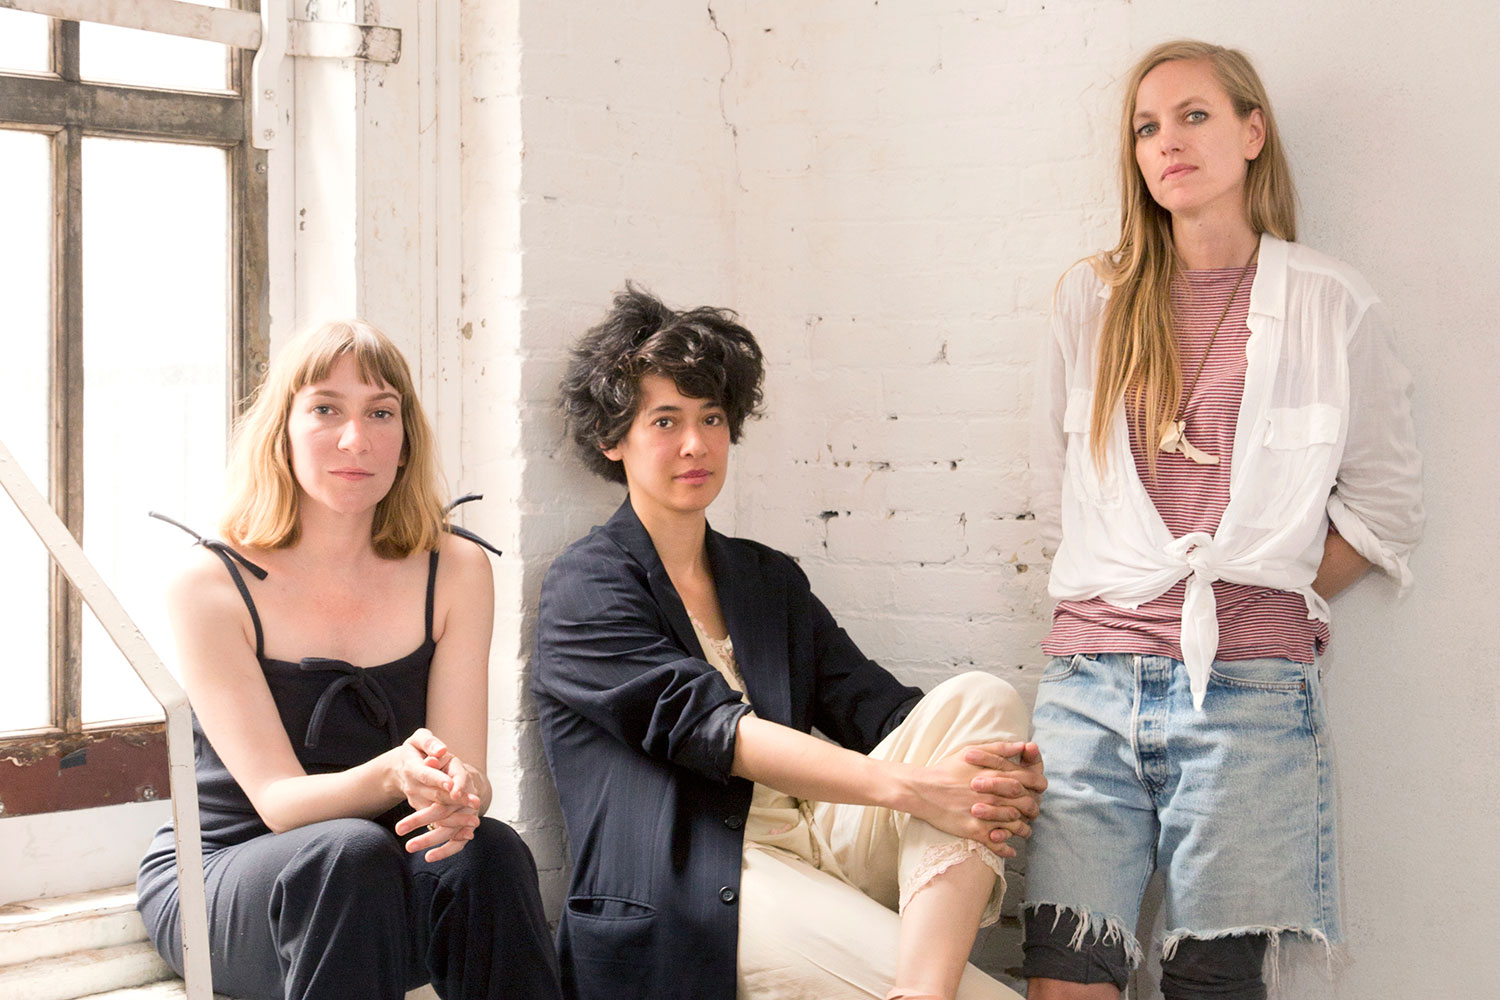 The book's editors, from left: Sheila Heti, Leanne Shapton, and Heidi Julavits. Photo by Gus Powell